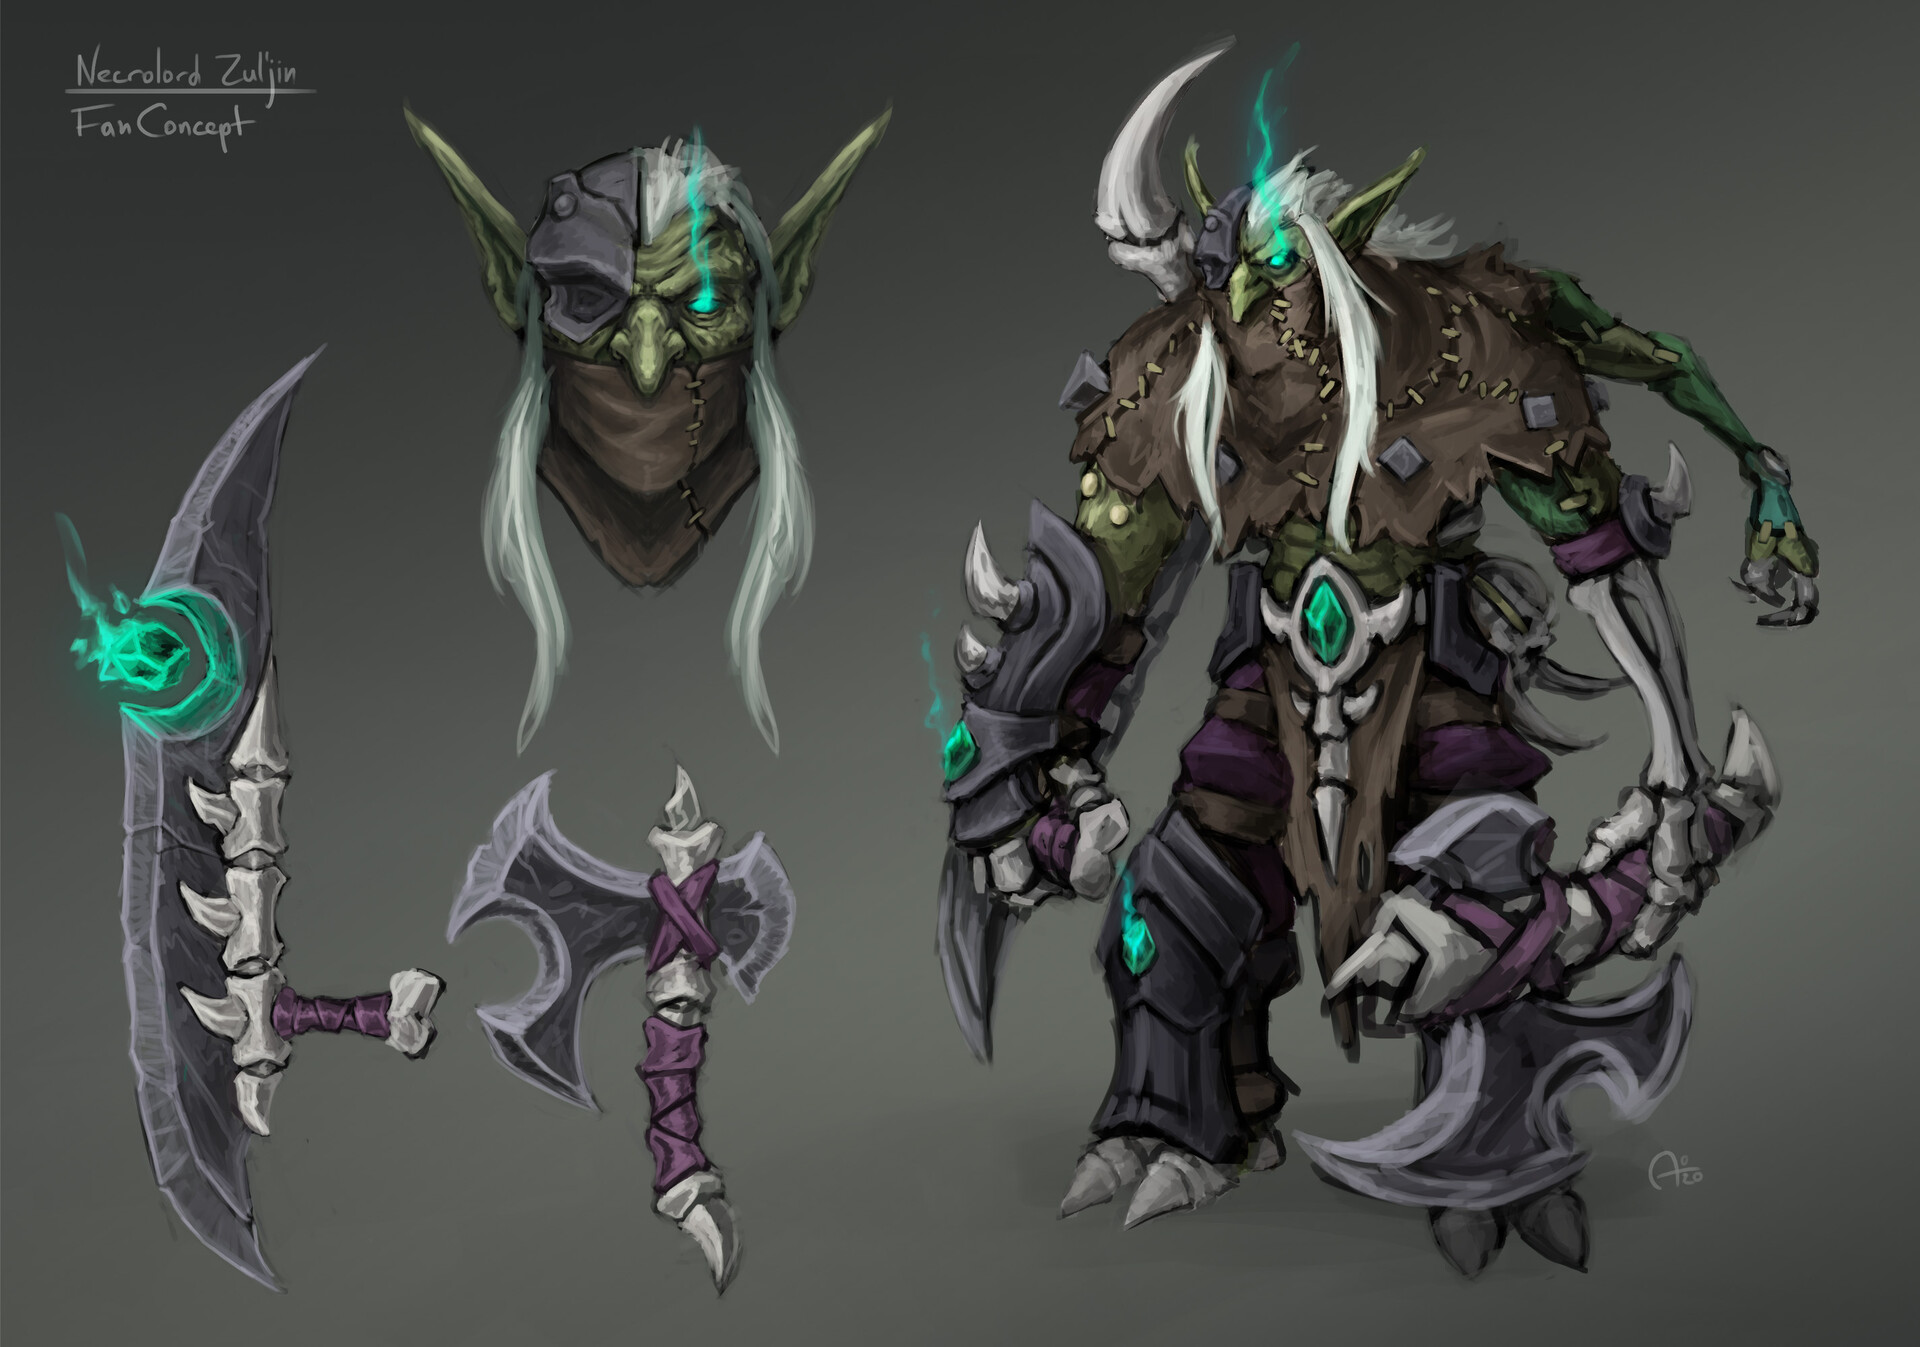 And I absolutely LOVE his concept for Necrolord Zul’jin! 